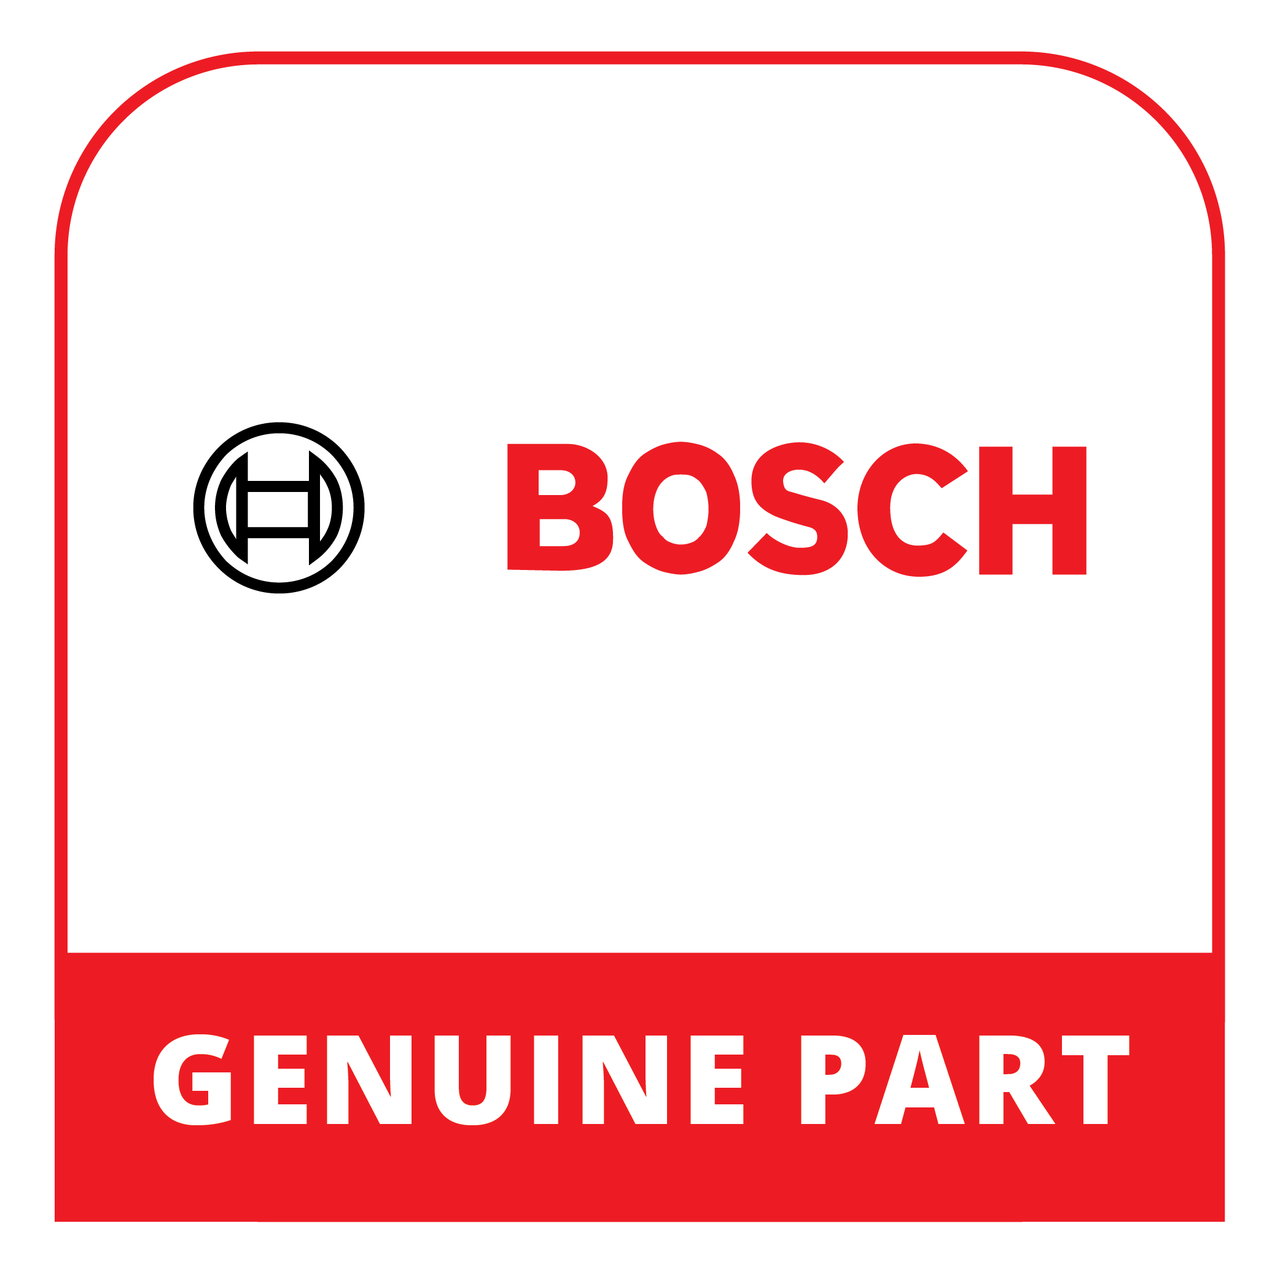 Bosch (Thermador) 18064955 - Instruction Manual - Genuine Bosch (Thermador) Part